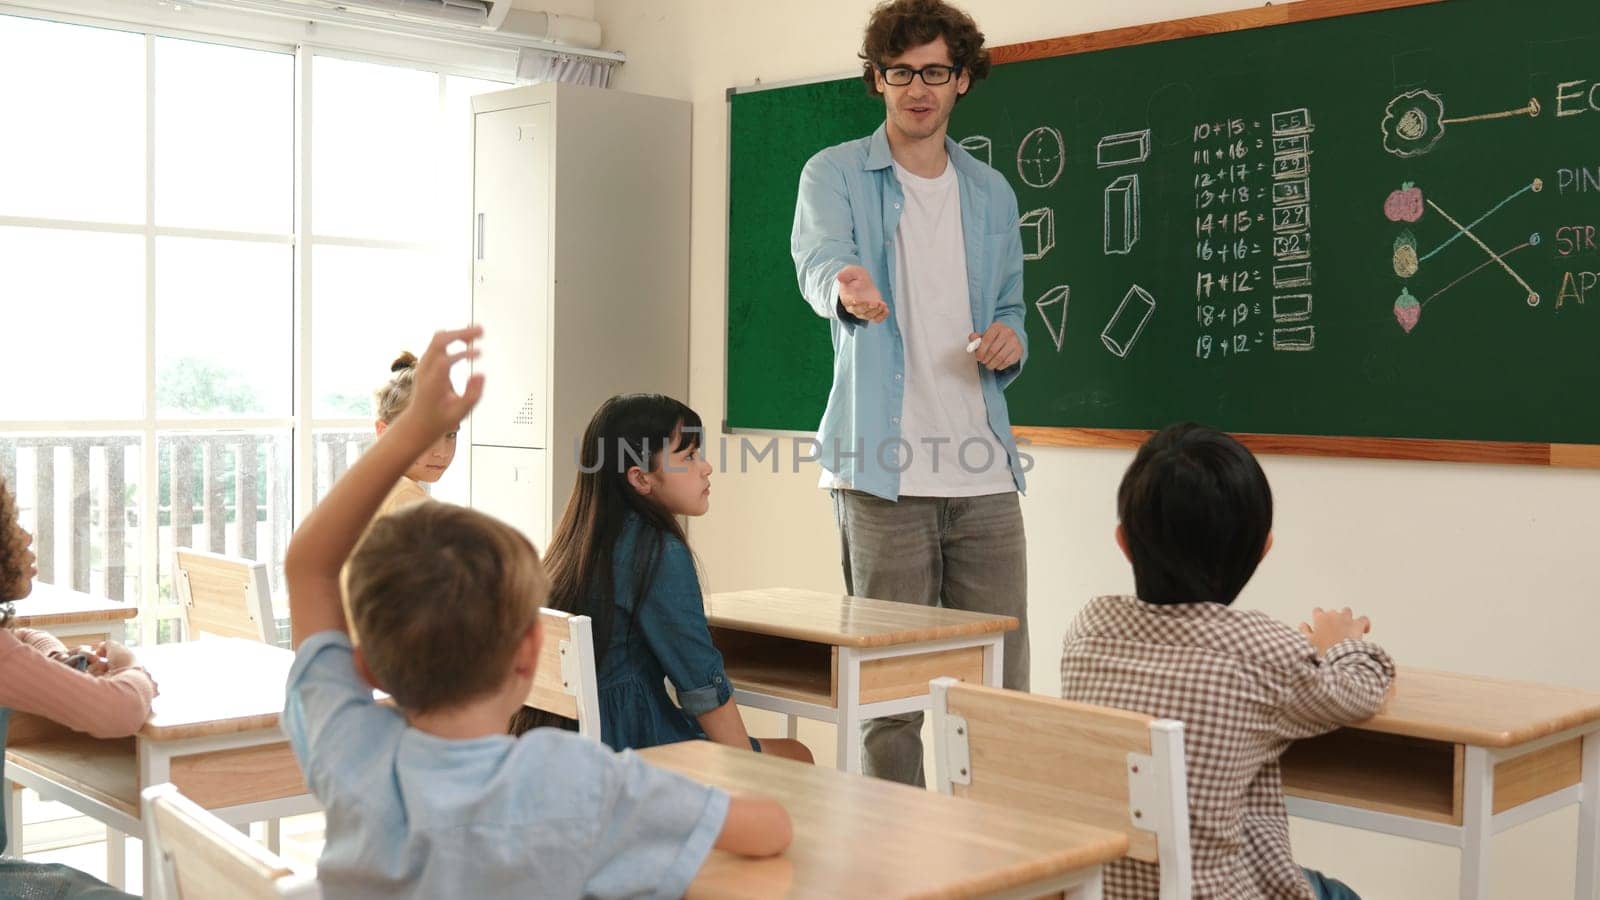 Energetic asian boy raised his hand and volunteer to write answer on blackboard. Teacher ask for volunteering to answer question while happy student receive chalk and walk in front of class. Pedagogy.